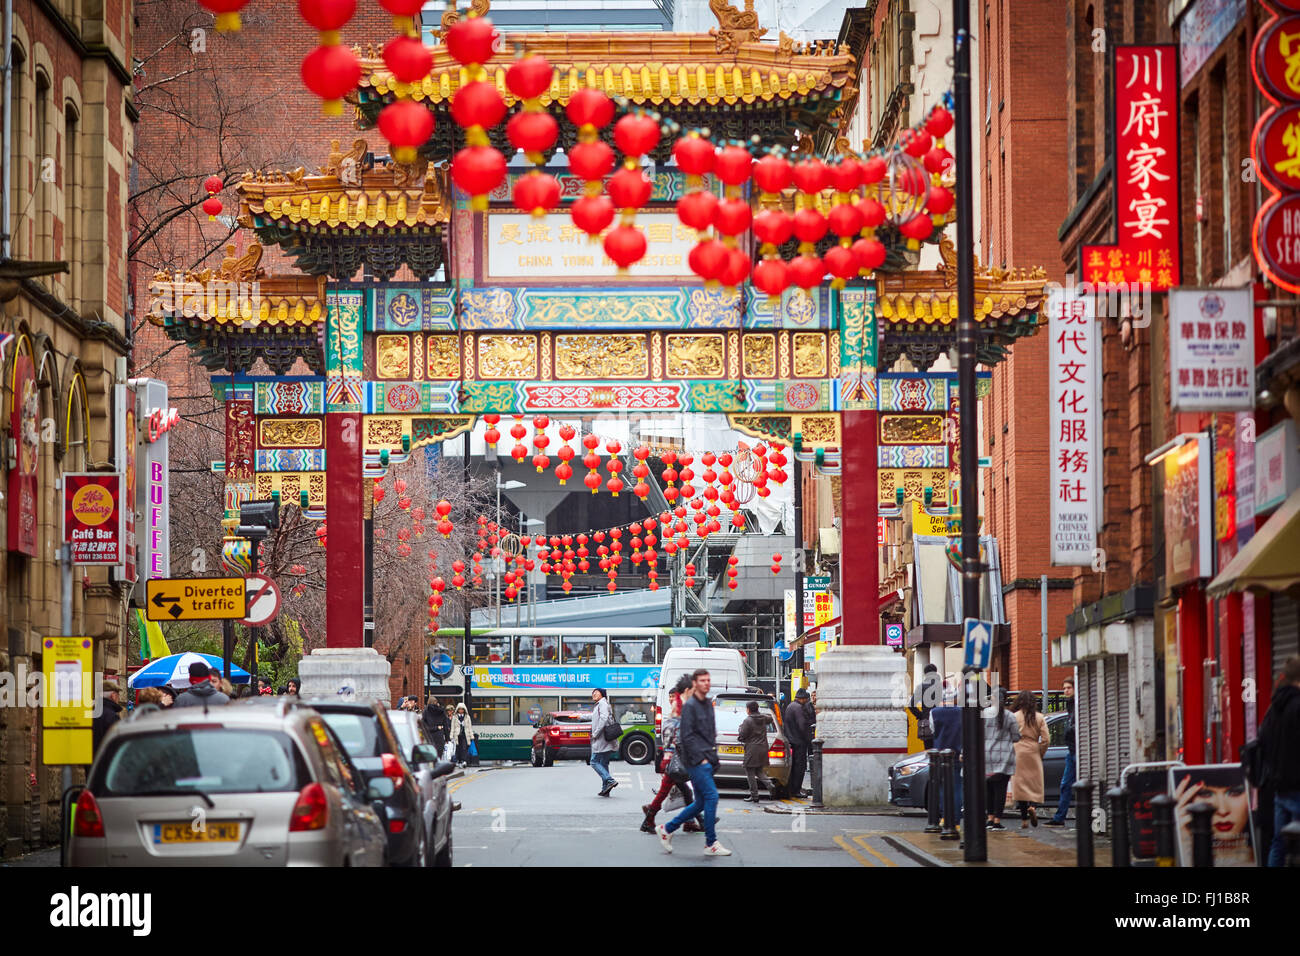 Chinese arch Manchester China Town   Decorated streets Historic history important significant landmark Faulkner street st  ethni Stock Photo